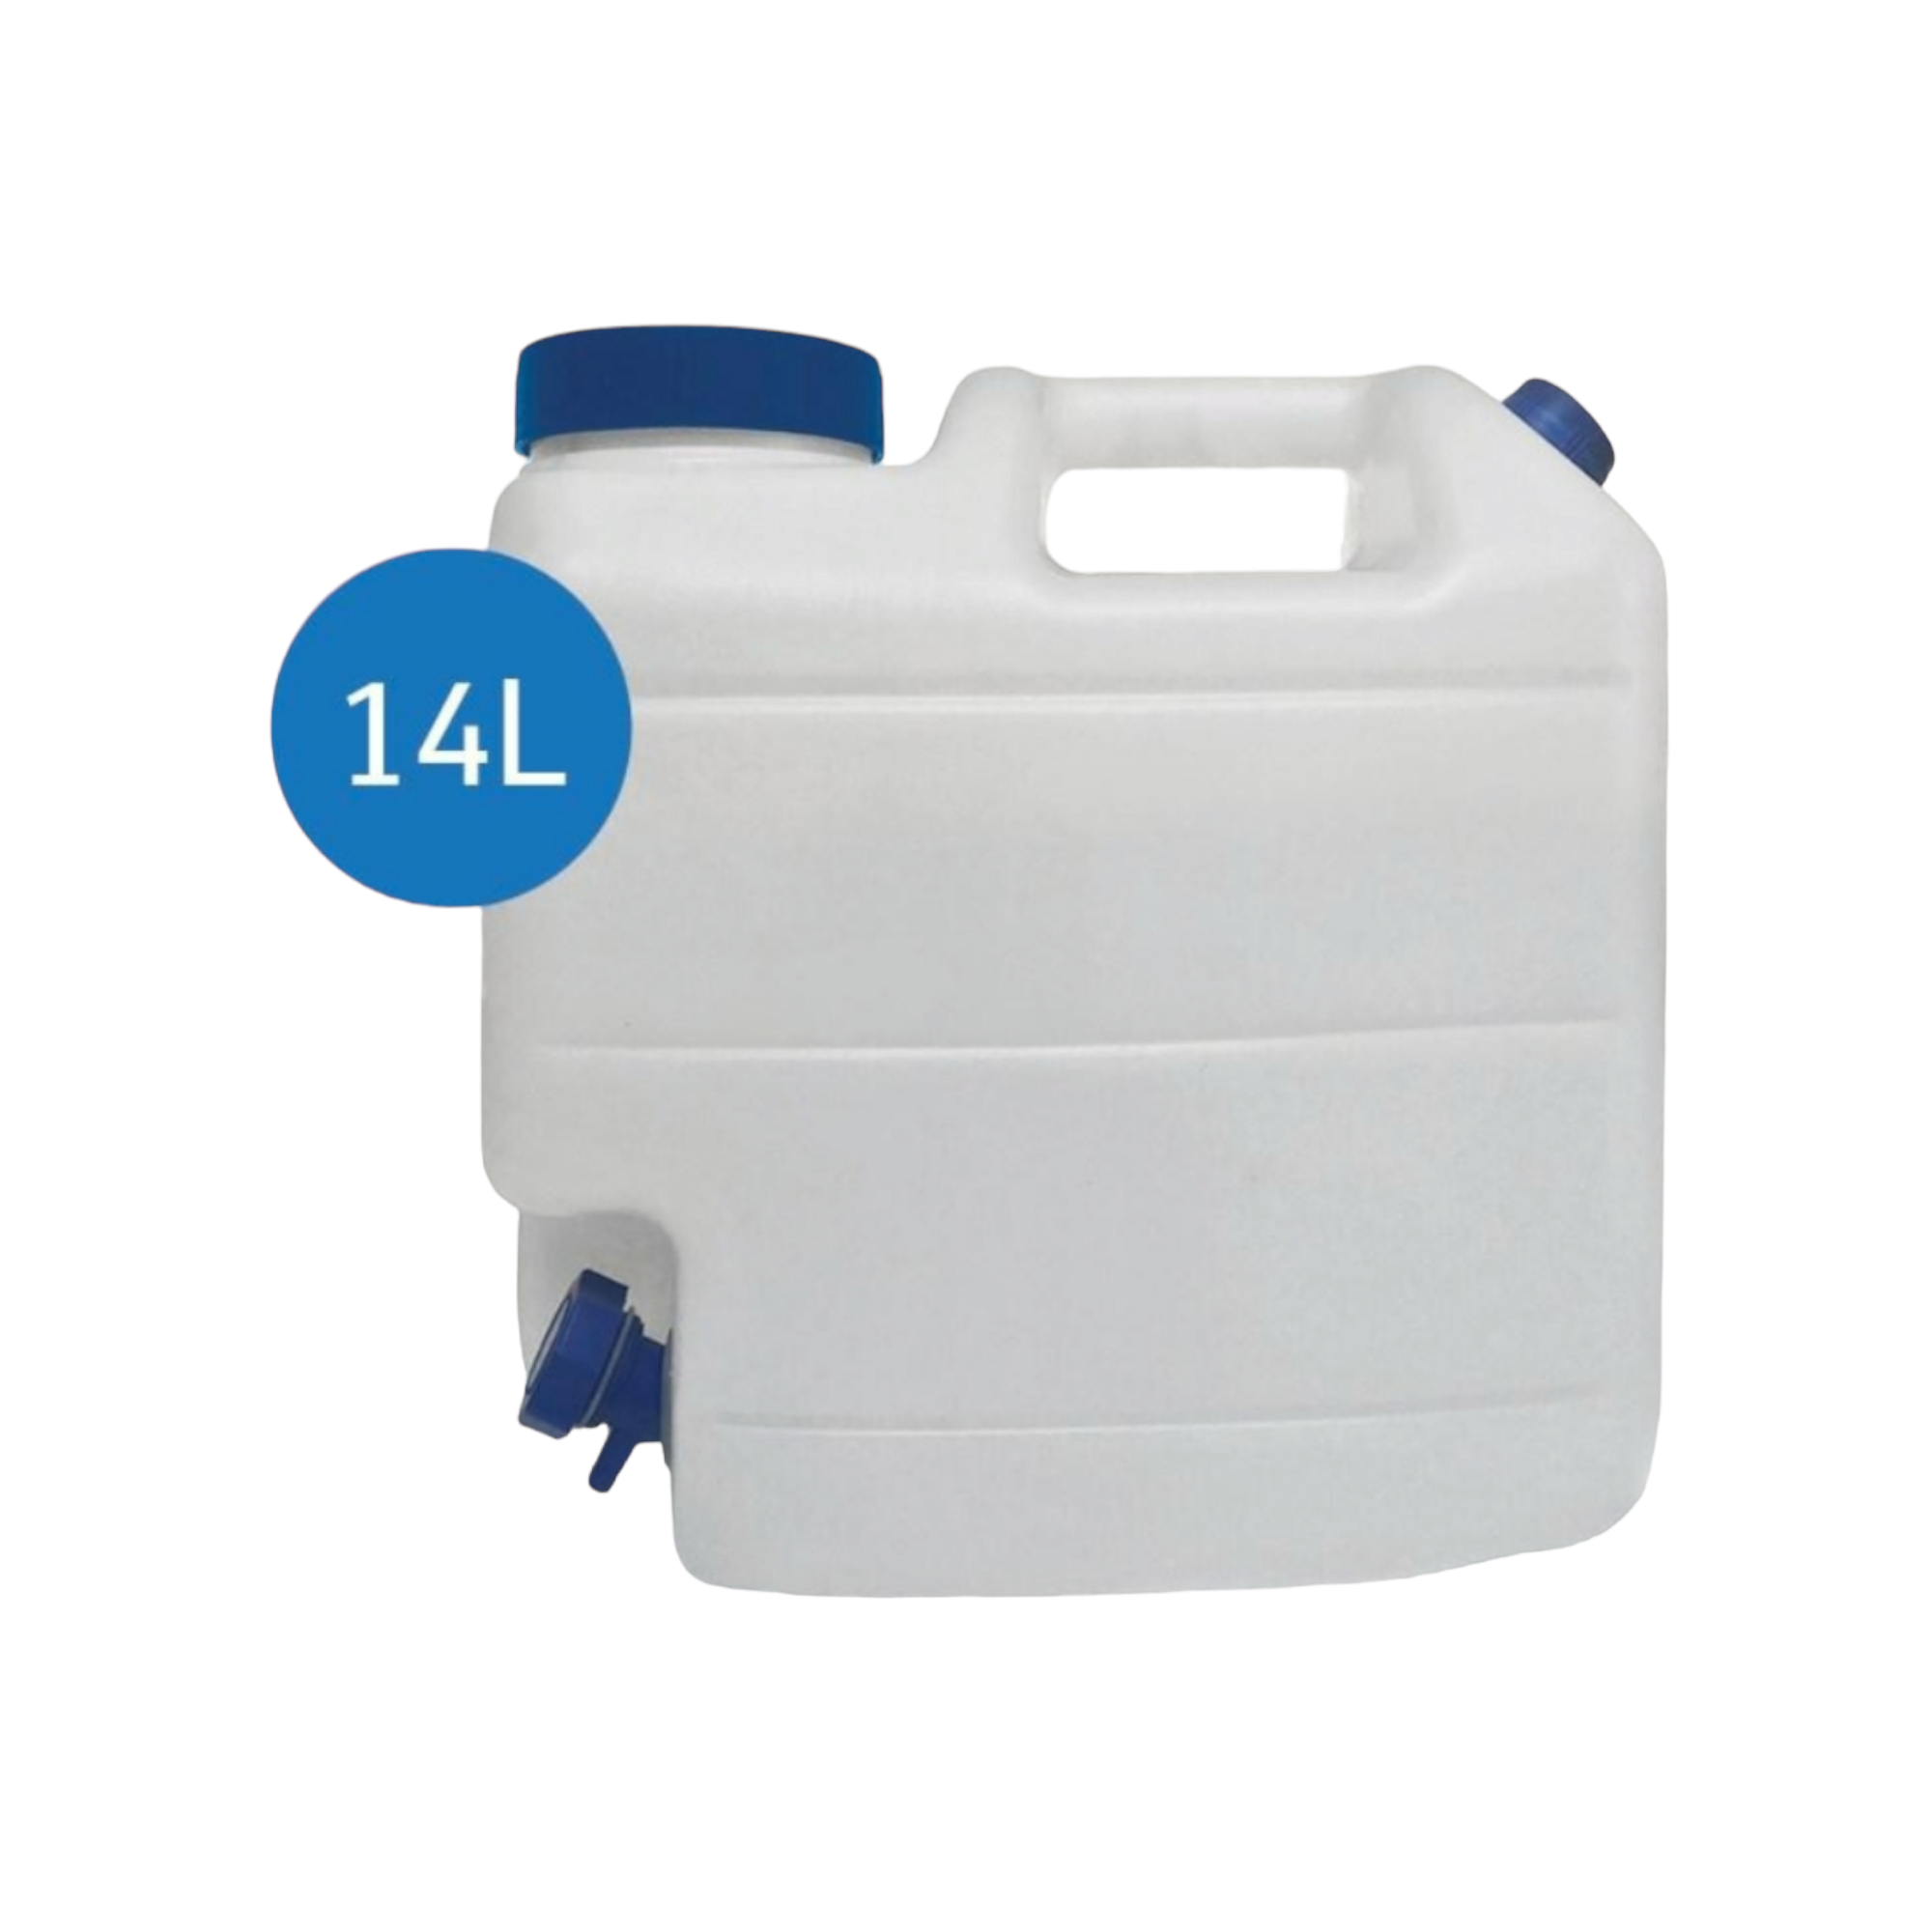 14L Jerry Can with tap - Heavy Duty Water Container